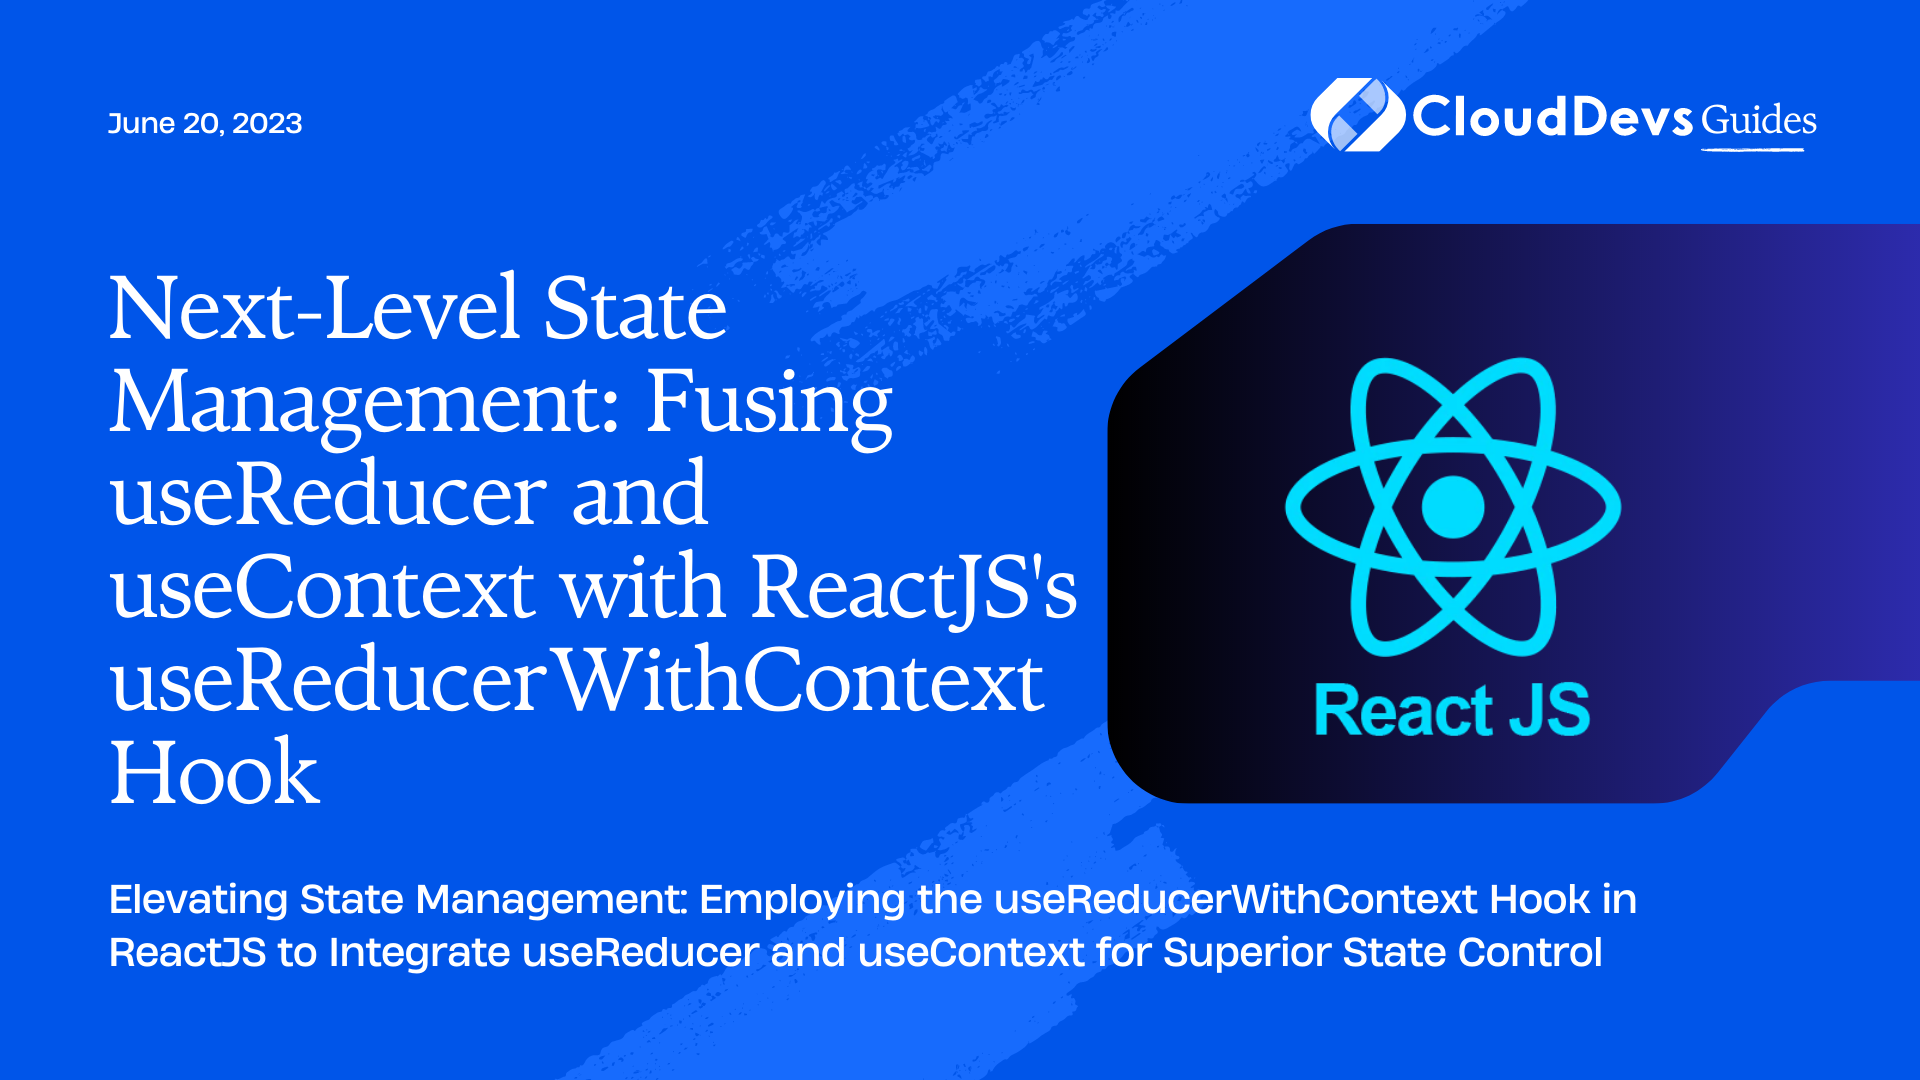 Next-Level State Management: Fusing useReducer and useContext with ReactJS's useReducerWithContext Hook